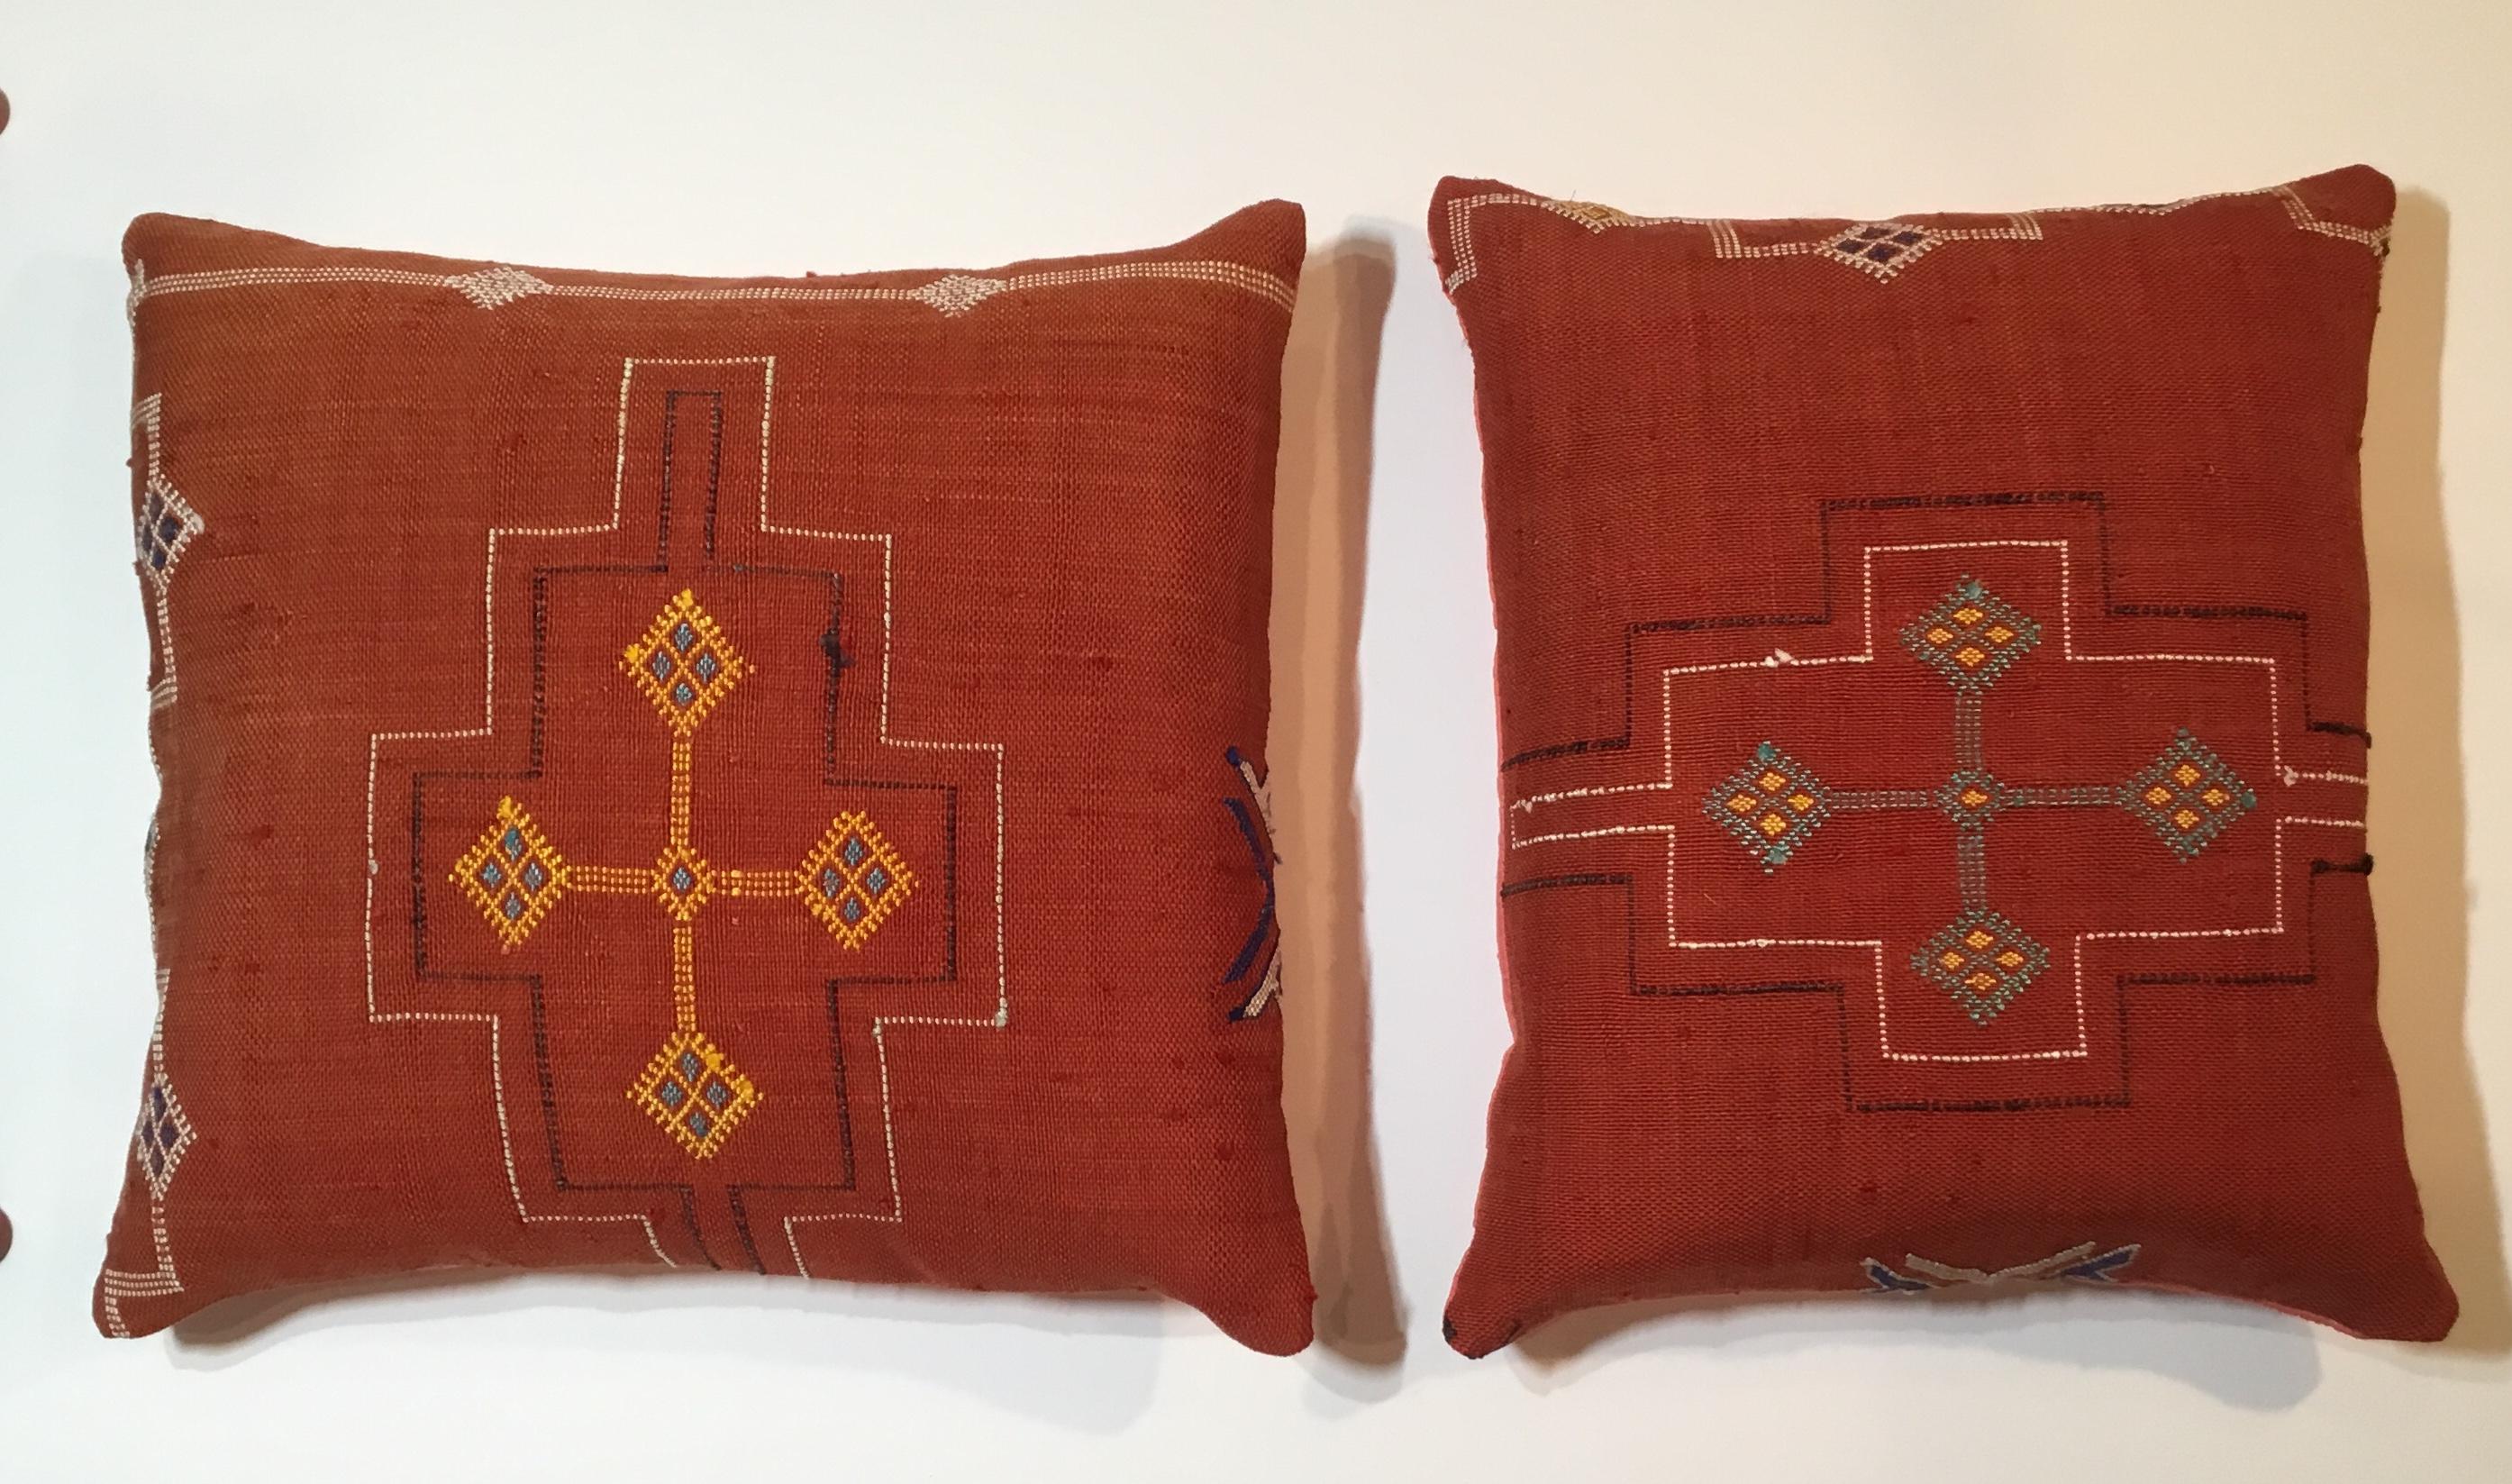 Beautiful pair of pillows made of hand woven flat-weave textile with multi colors geometric motifs on a red background, fine silk backing frash inserts.
Sizes:
1. 19”.5 x 18”.5 x4”
2. 19”.5 x 16” x. 4”.